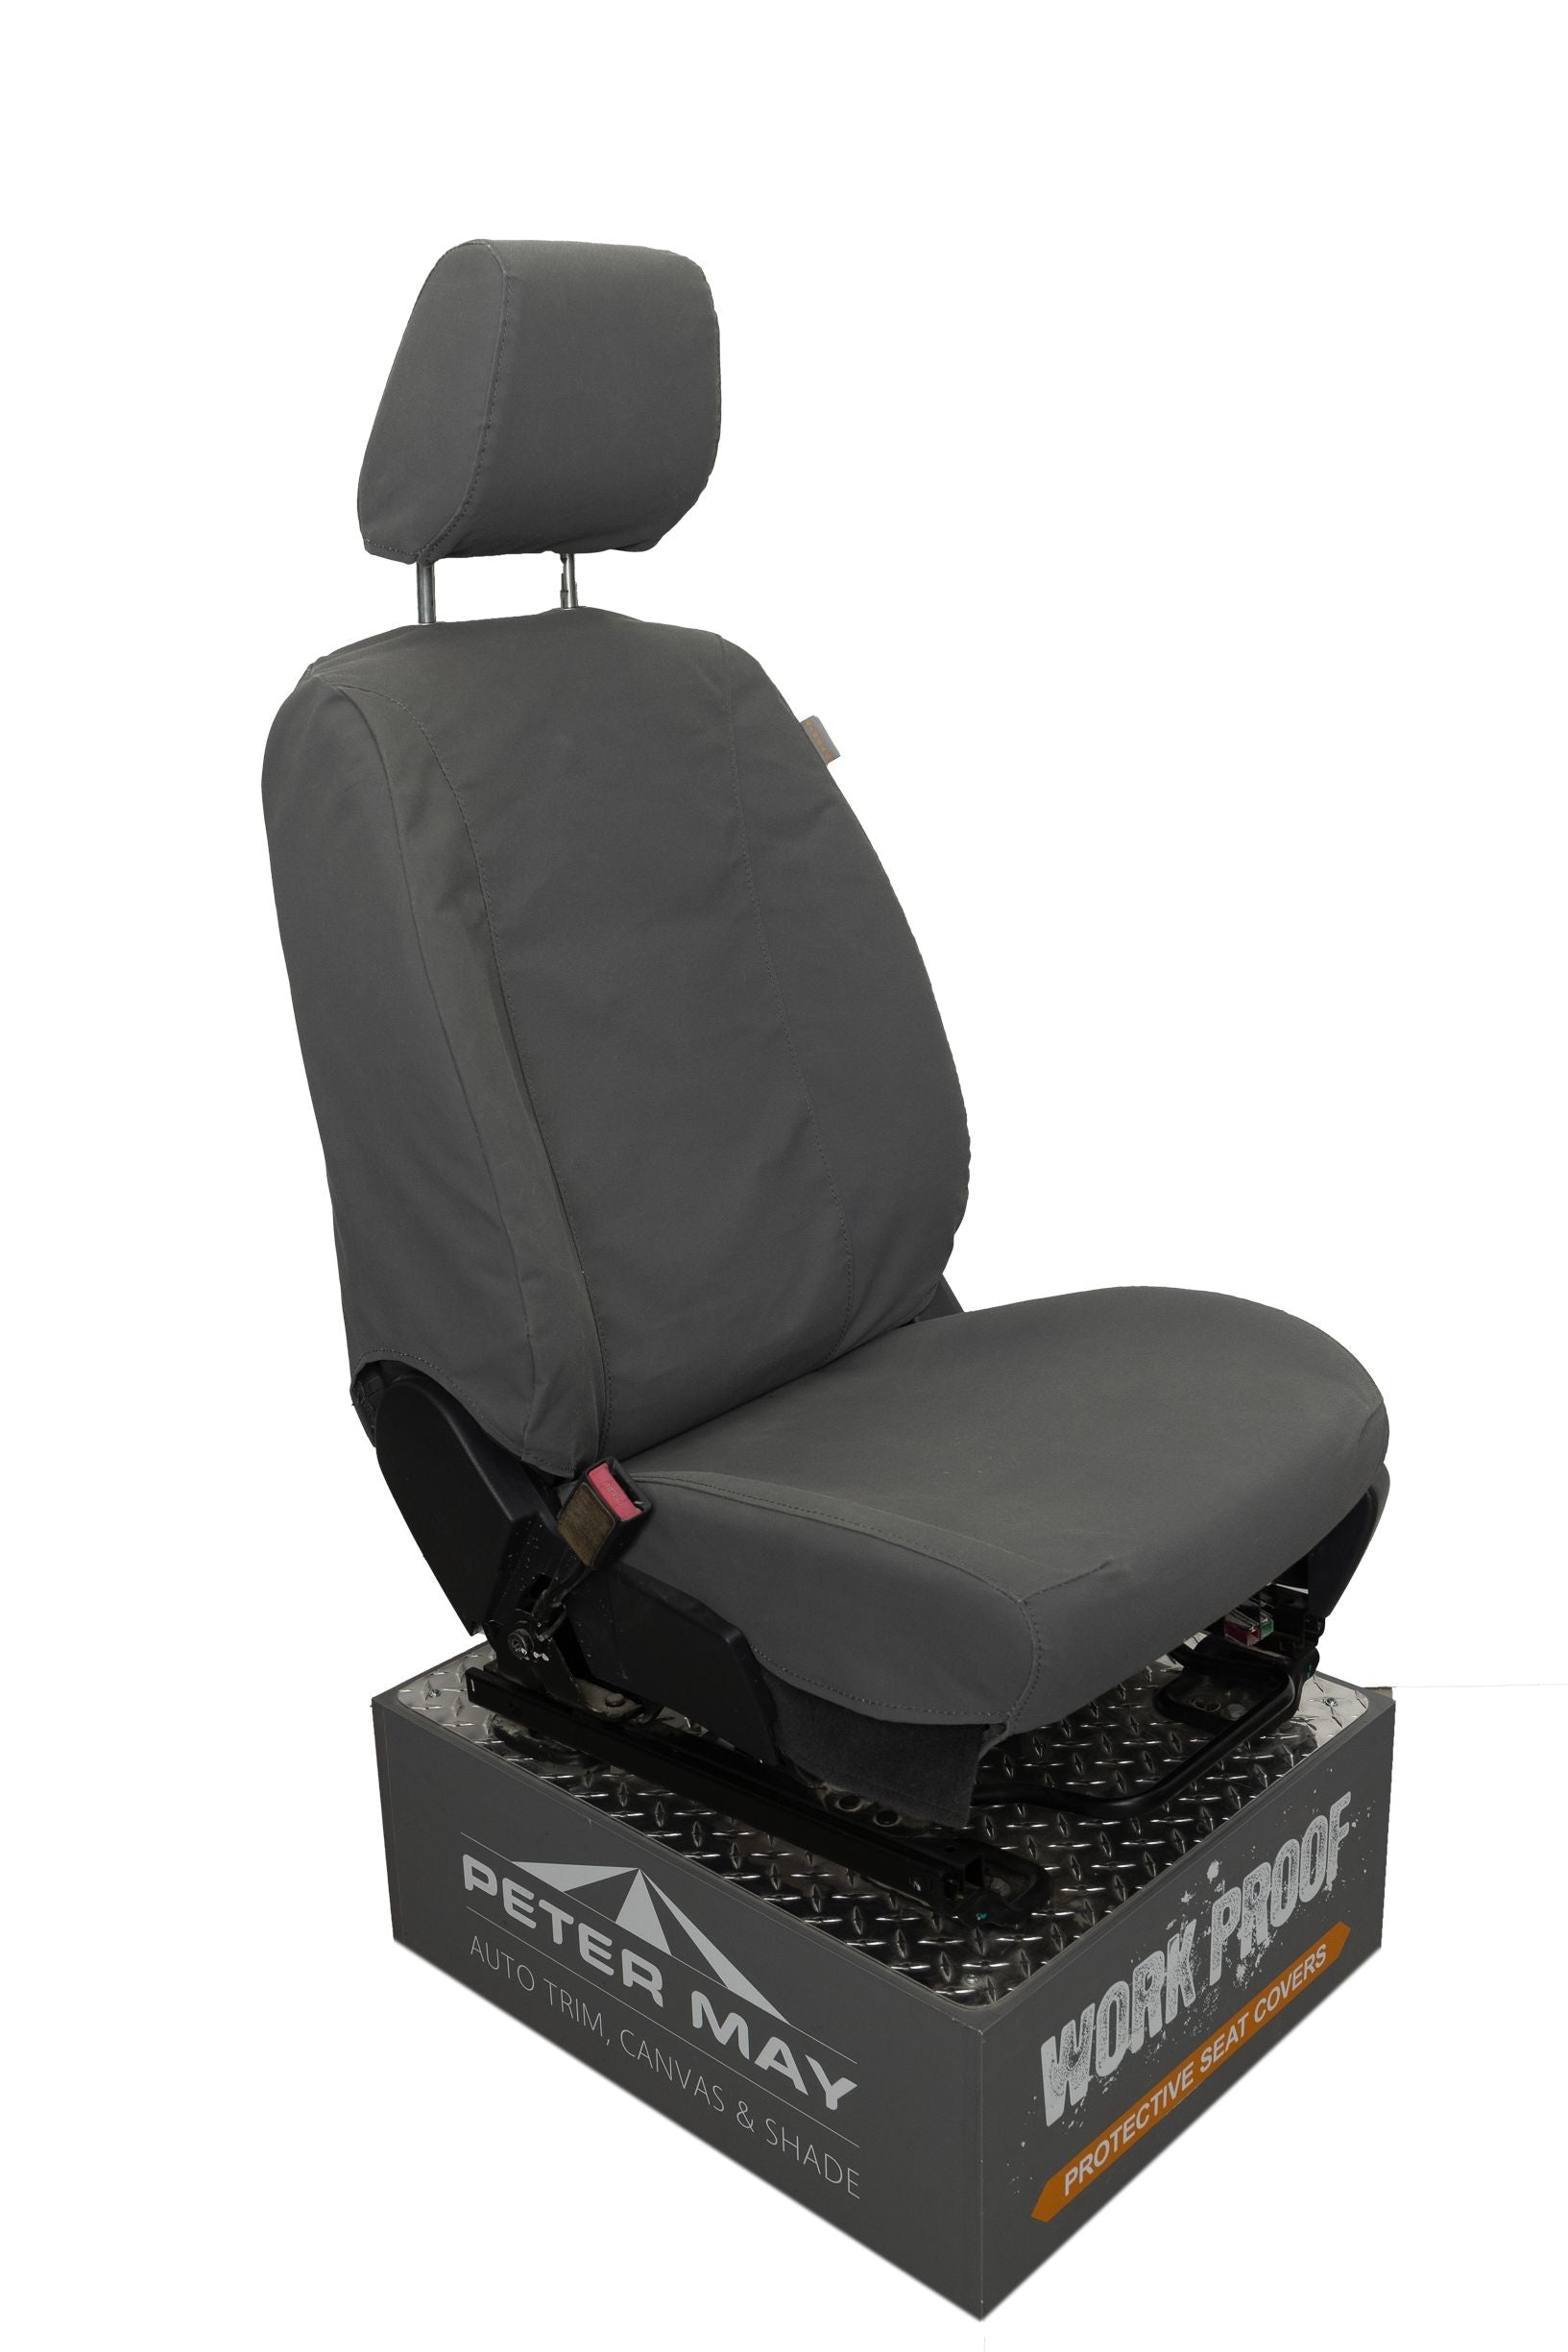 Toyota Hilux 2010-2014 Seat Covers